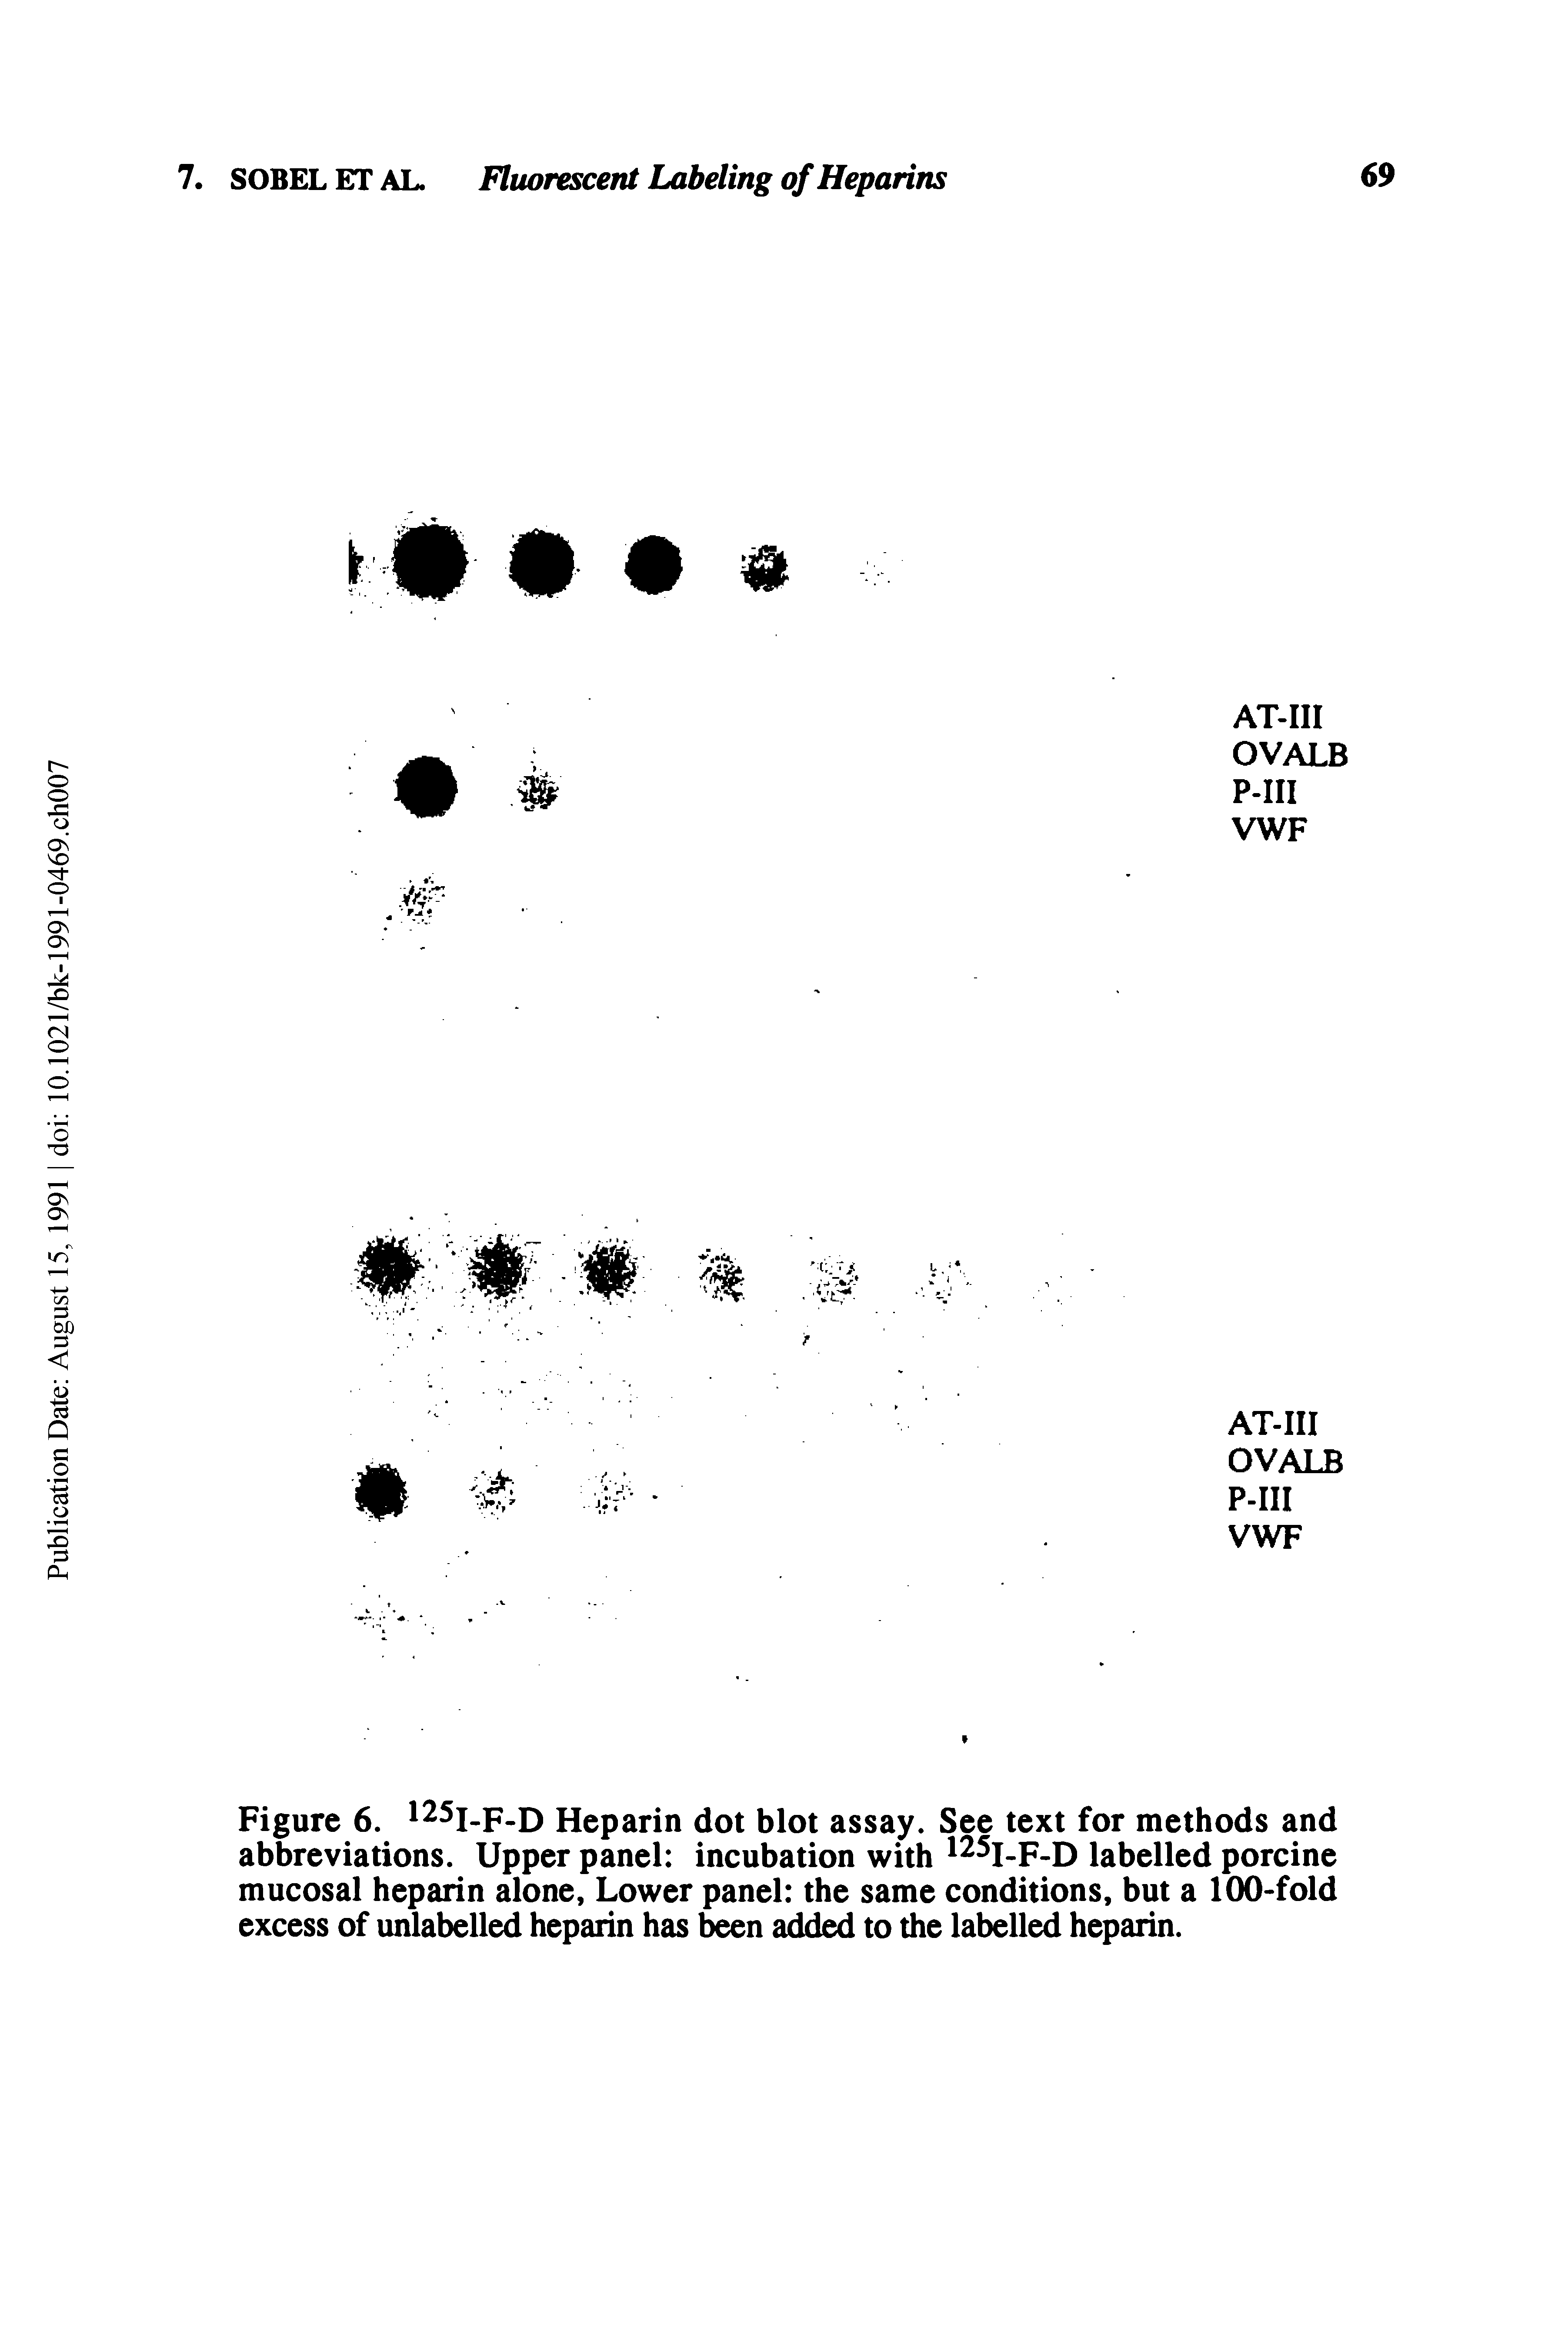 Figure 6. 125I-F-D Heparin dot blot assay. See text for methods and abbreviations. Upper panel incubation with 125I-F-D labelled porcine mucosal heparin alone, Lower panel the same conditions, but a 100-fold excess of unlabelled heparin has been added to the labelled heparin.